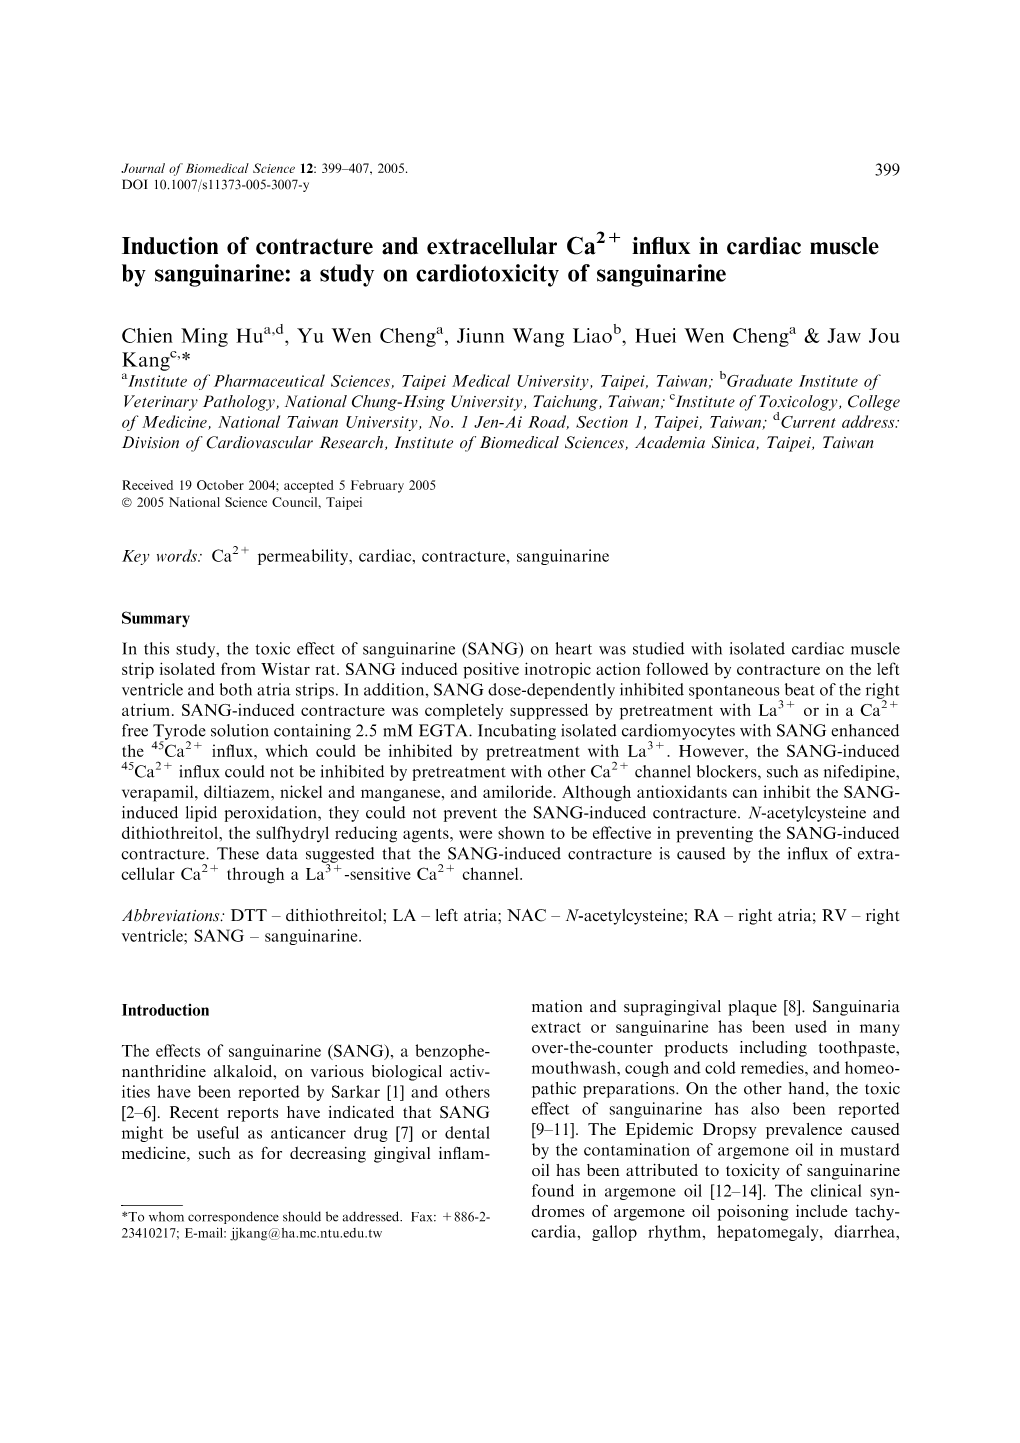 Induction of Contracture and Extracellular Ca Influx in Cardiac Muscle by Sanguinarine: a Study on Cardiotoxicity of Sanguinarin